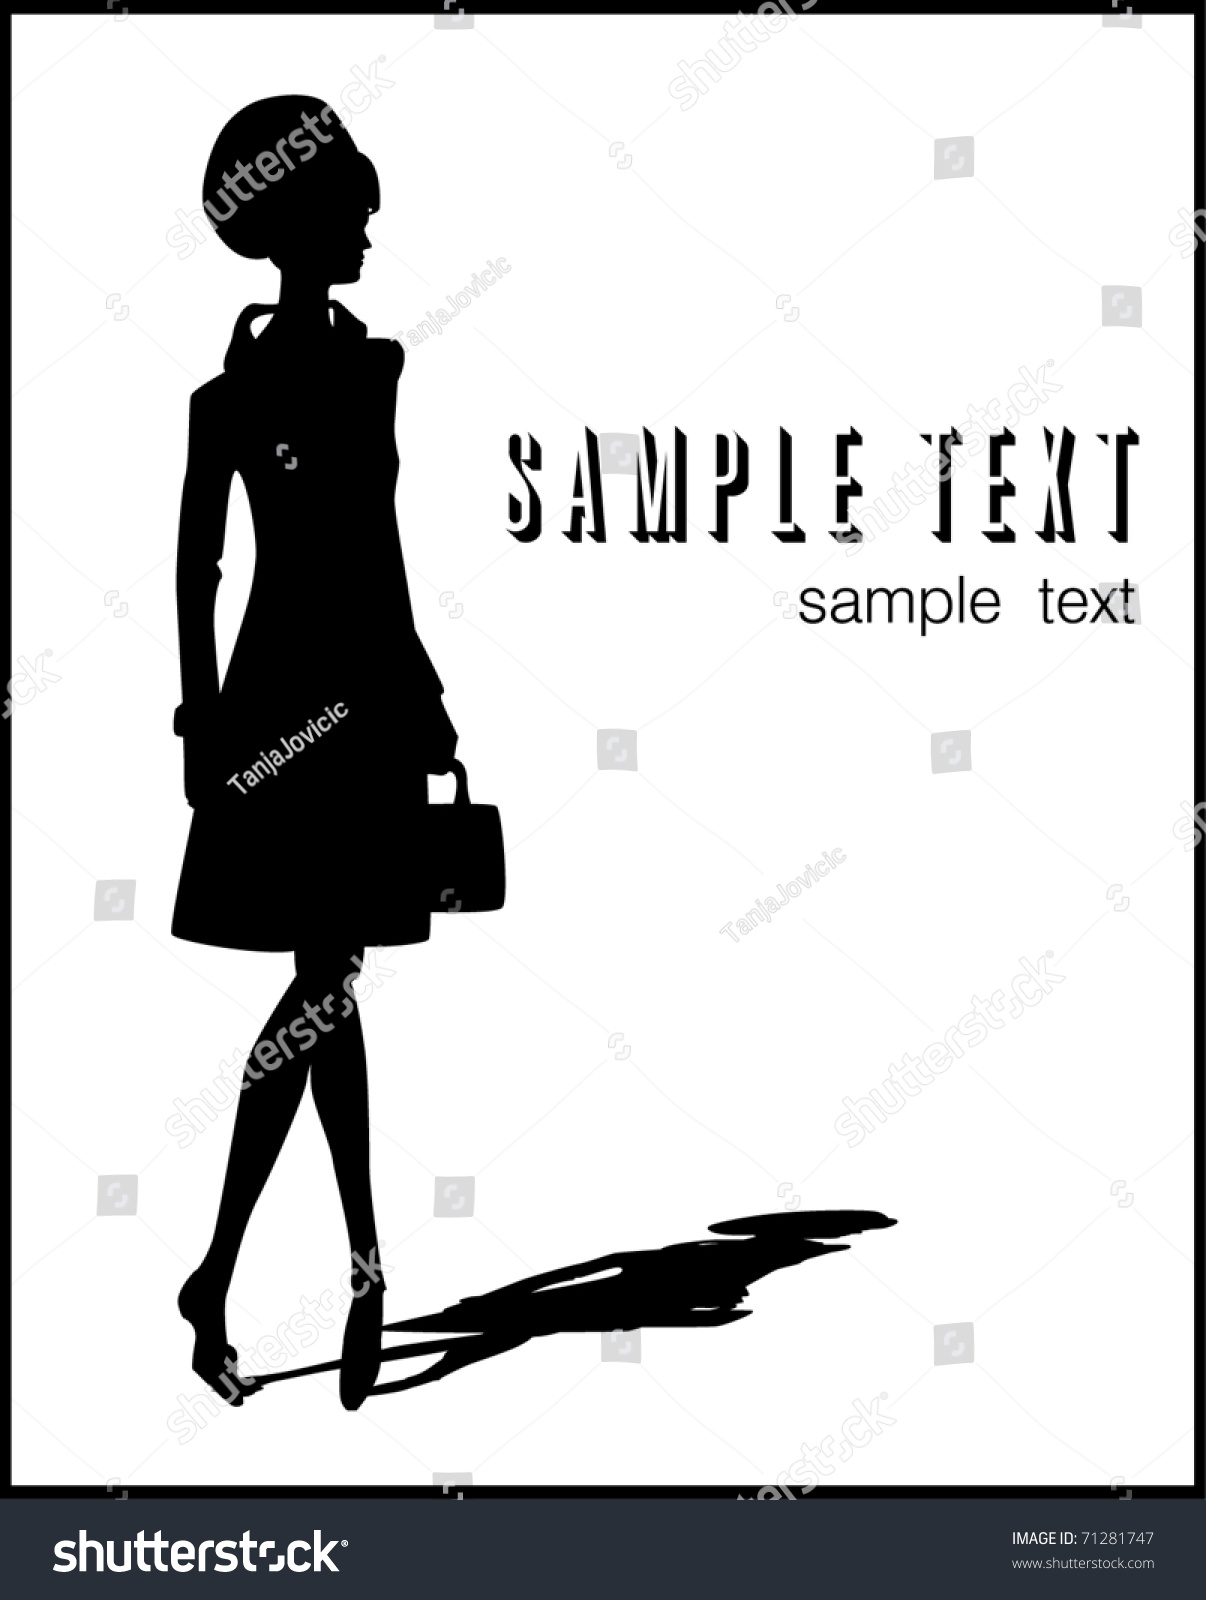 SVG of woman silhouette illustration with a bag svg